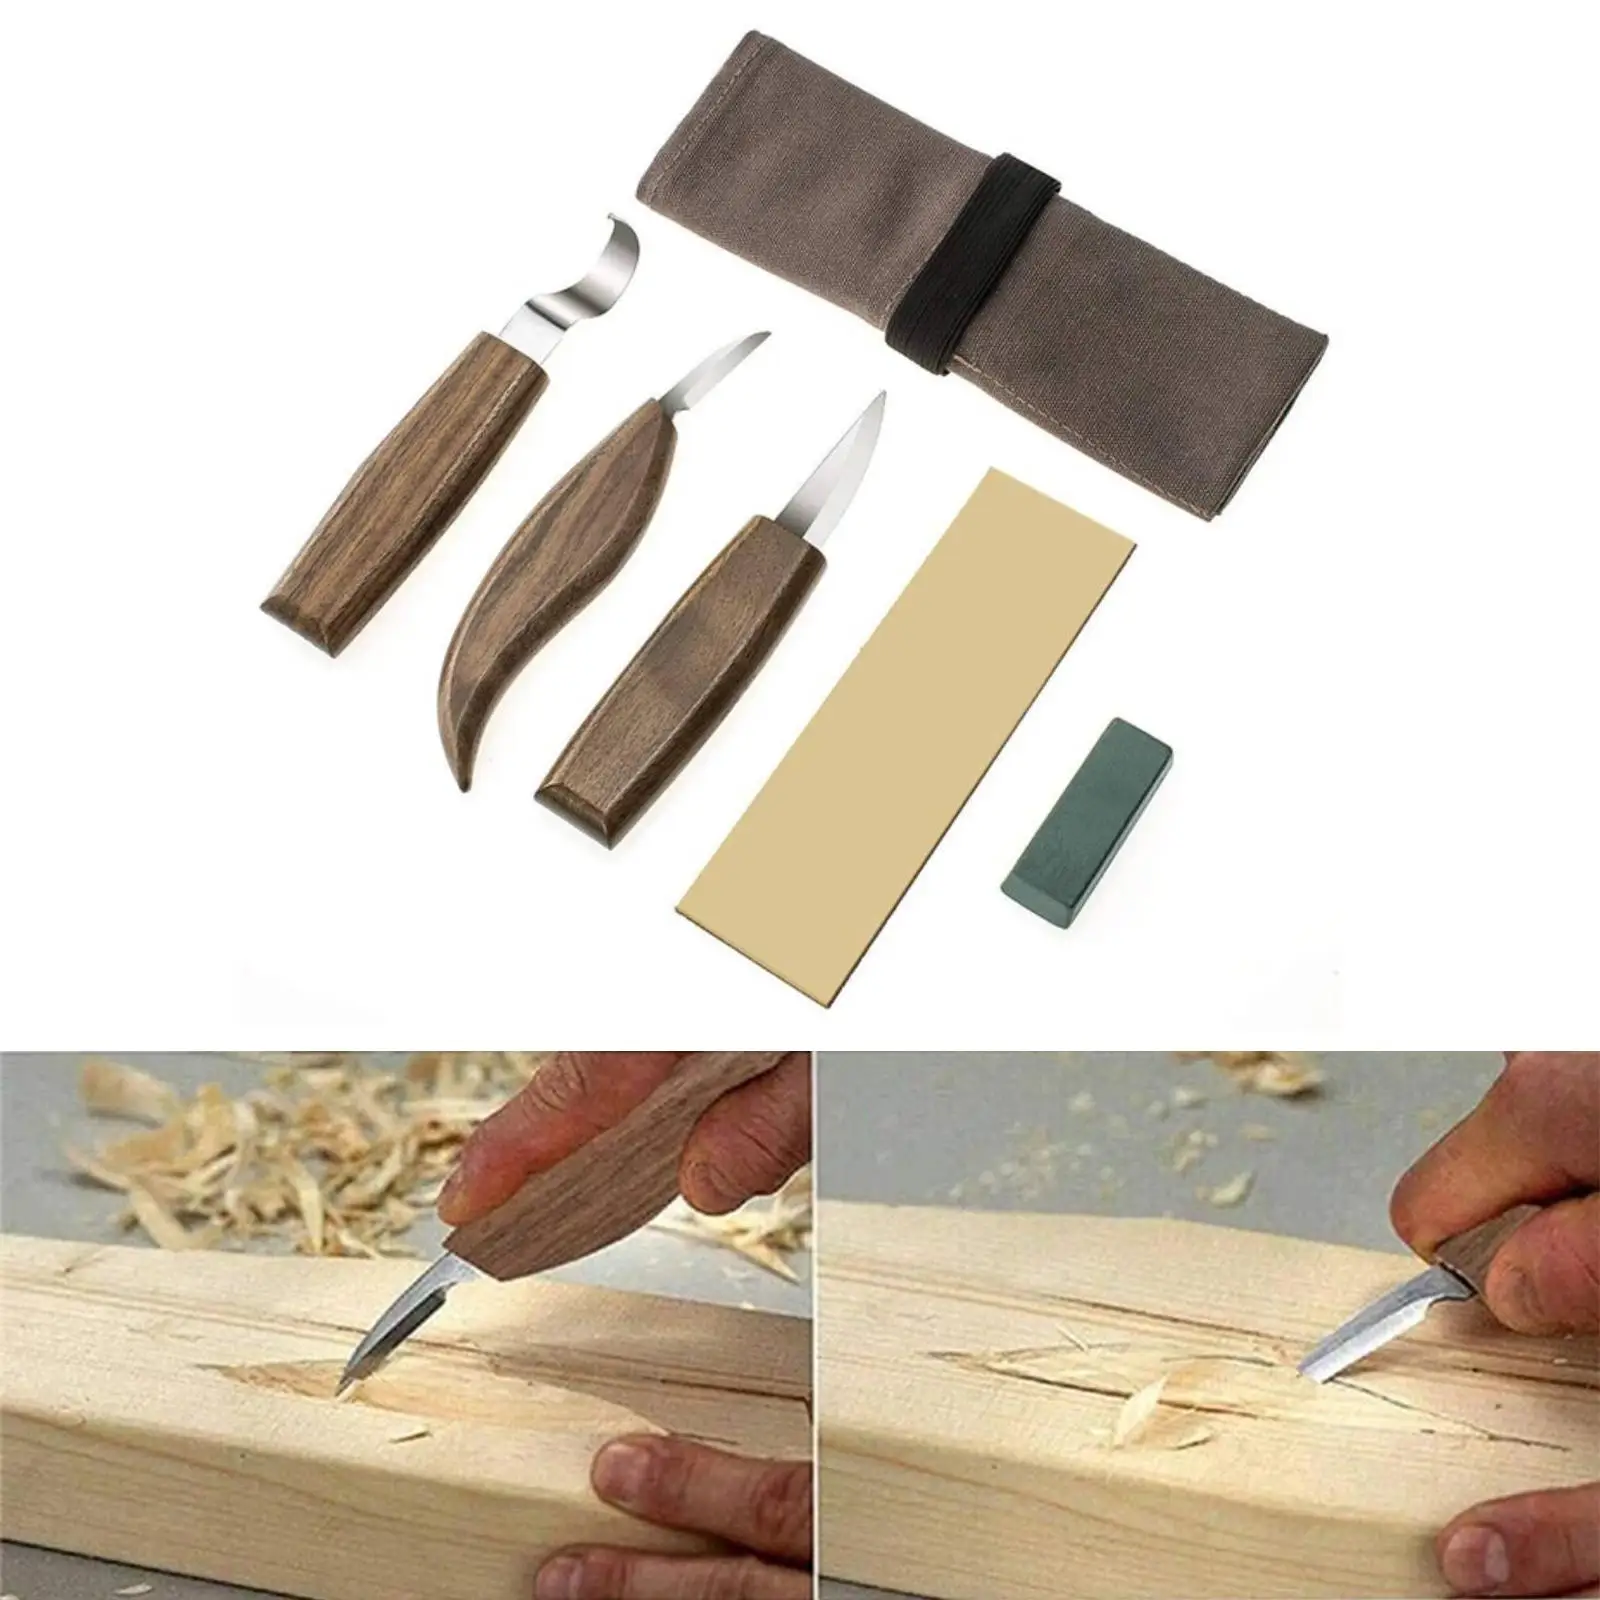 Wood Carving Tools - Woodworking Hand Too, Carving for Beginners Adults Kids